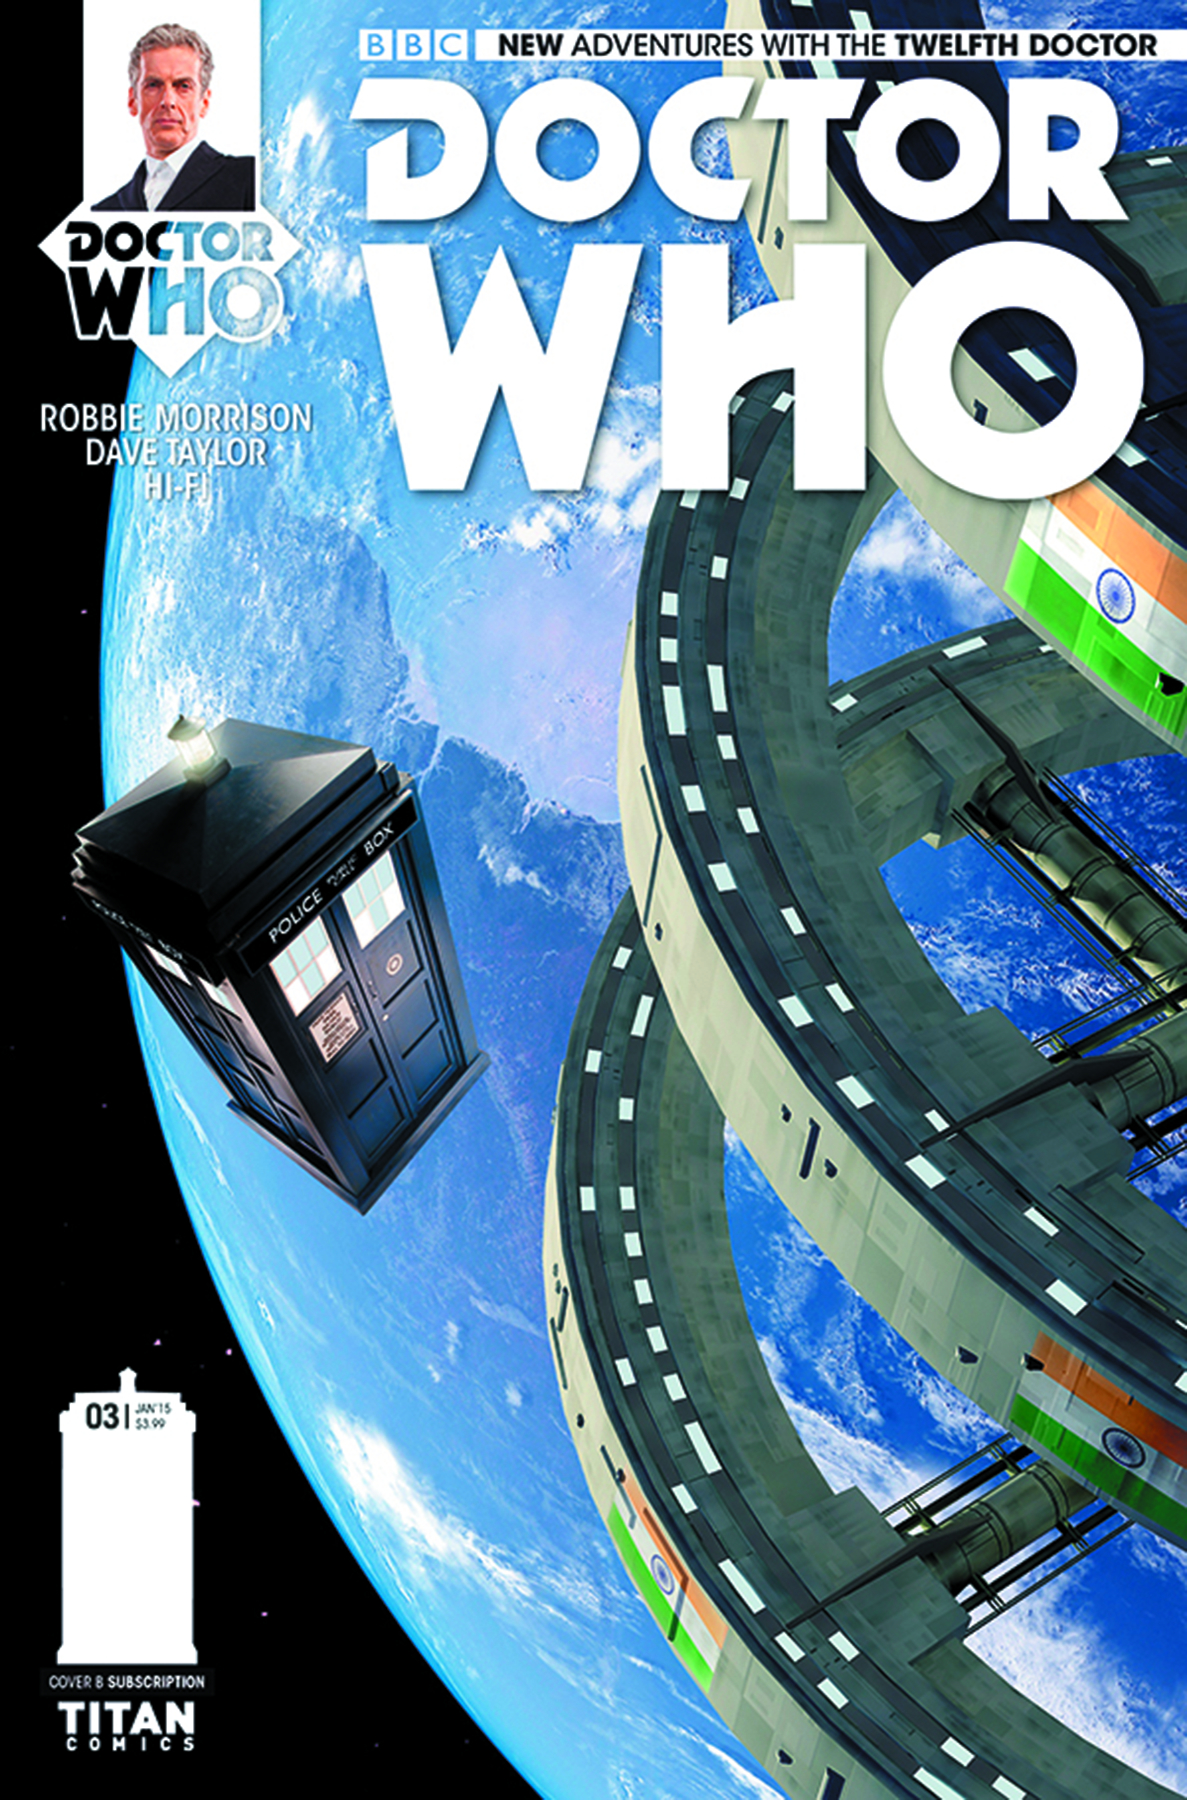 DOCTOR WHO 12TH #4 SUBSCRIPTION PHOTO